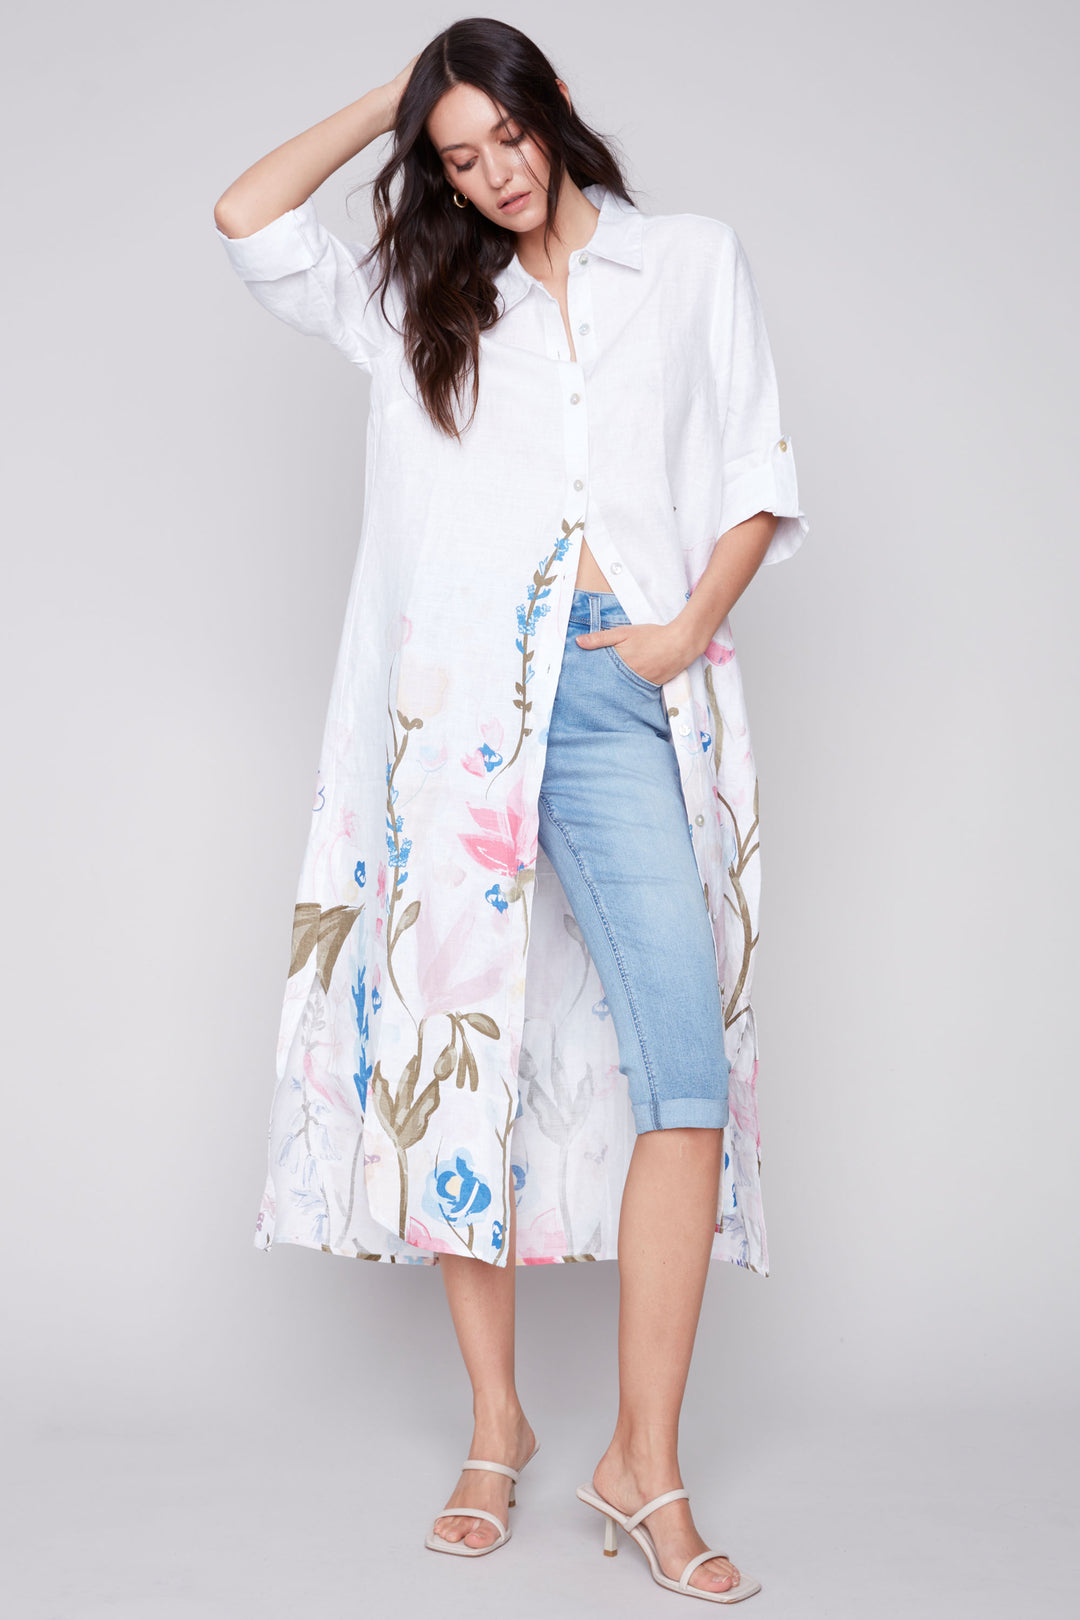 Charlie B spring 2024 women's casual linen long blouse duster shirt dress with floral print